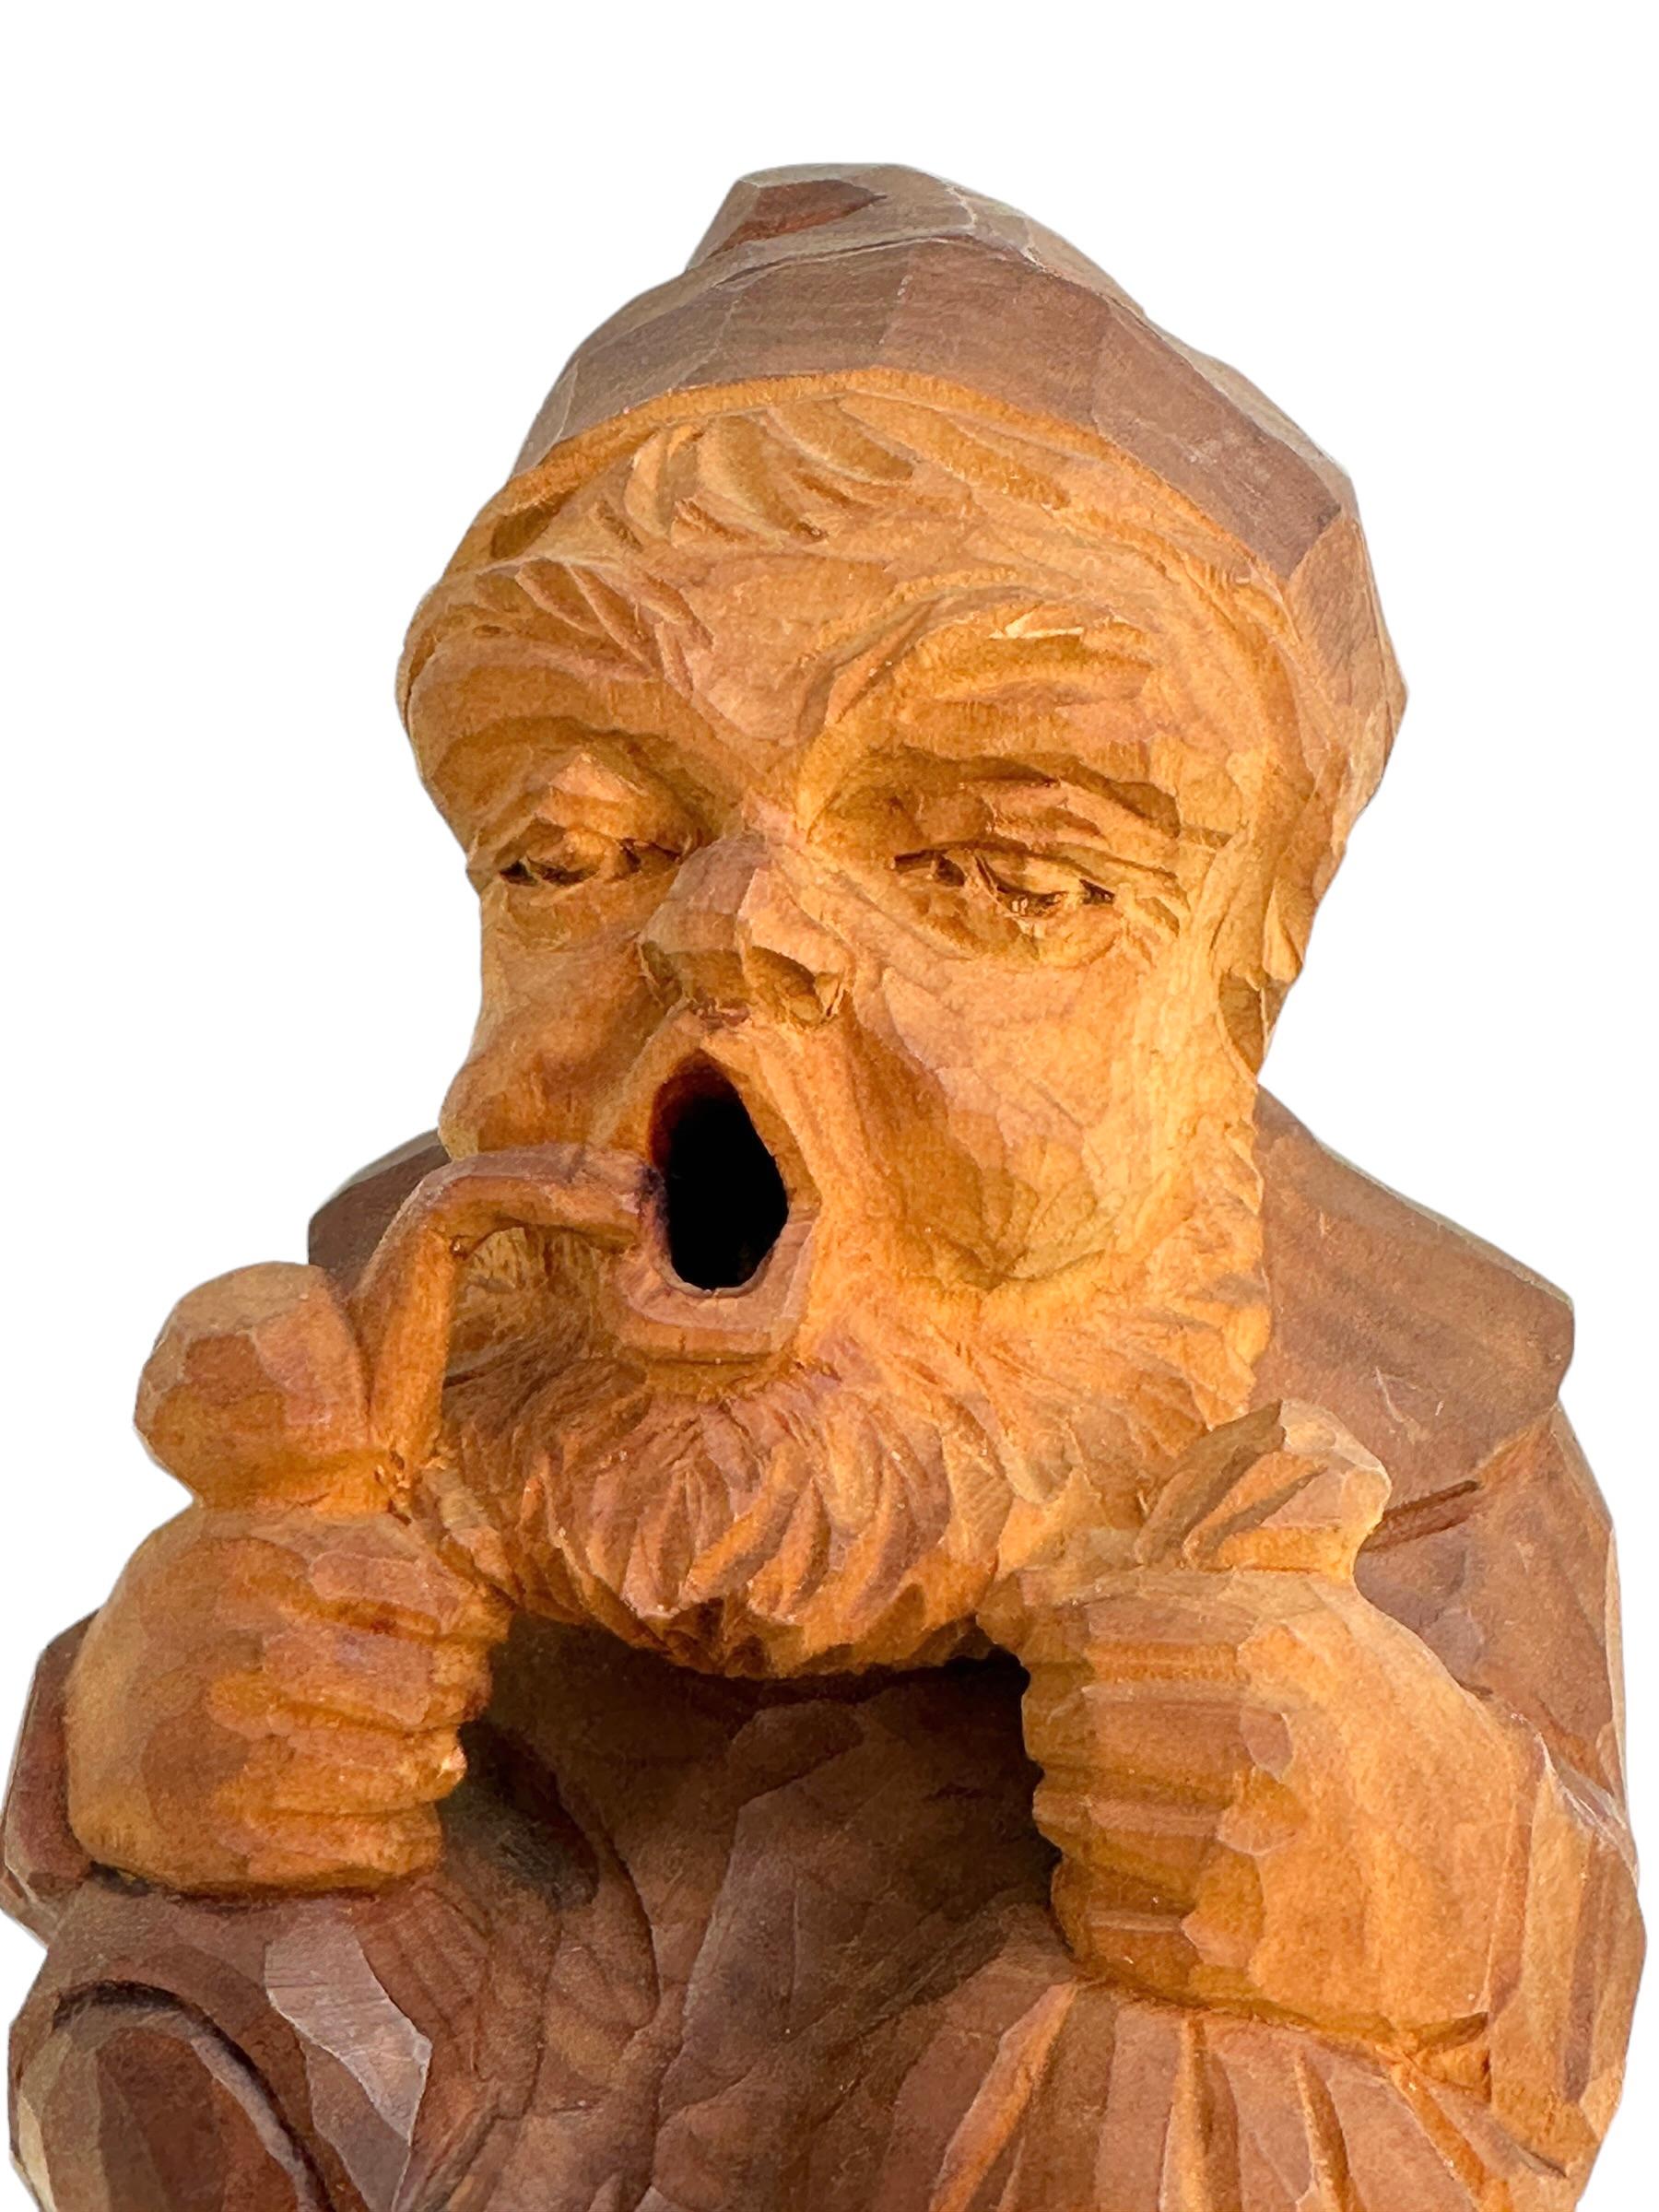 Mid-20th Century Hand Carved Wooden Smoker Gnome Figure, Vintage German Black Forest Folk Art  For Sale